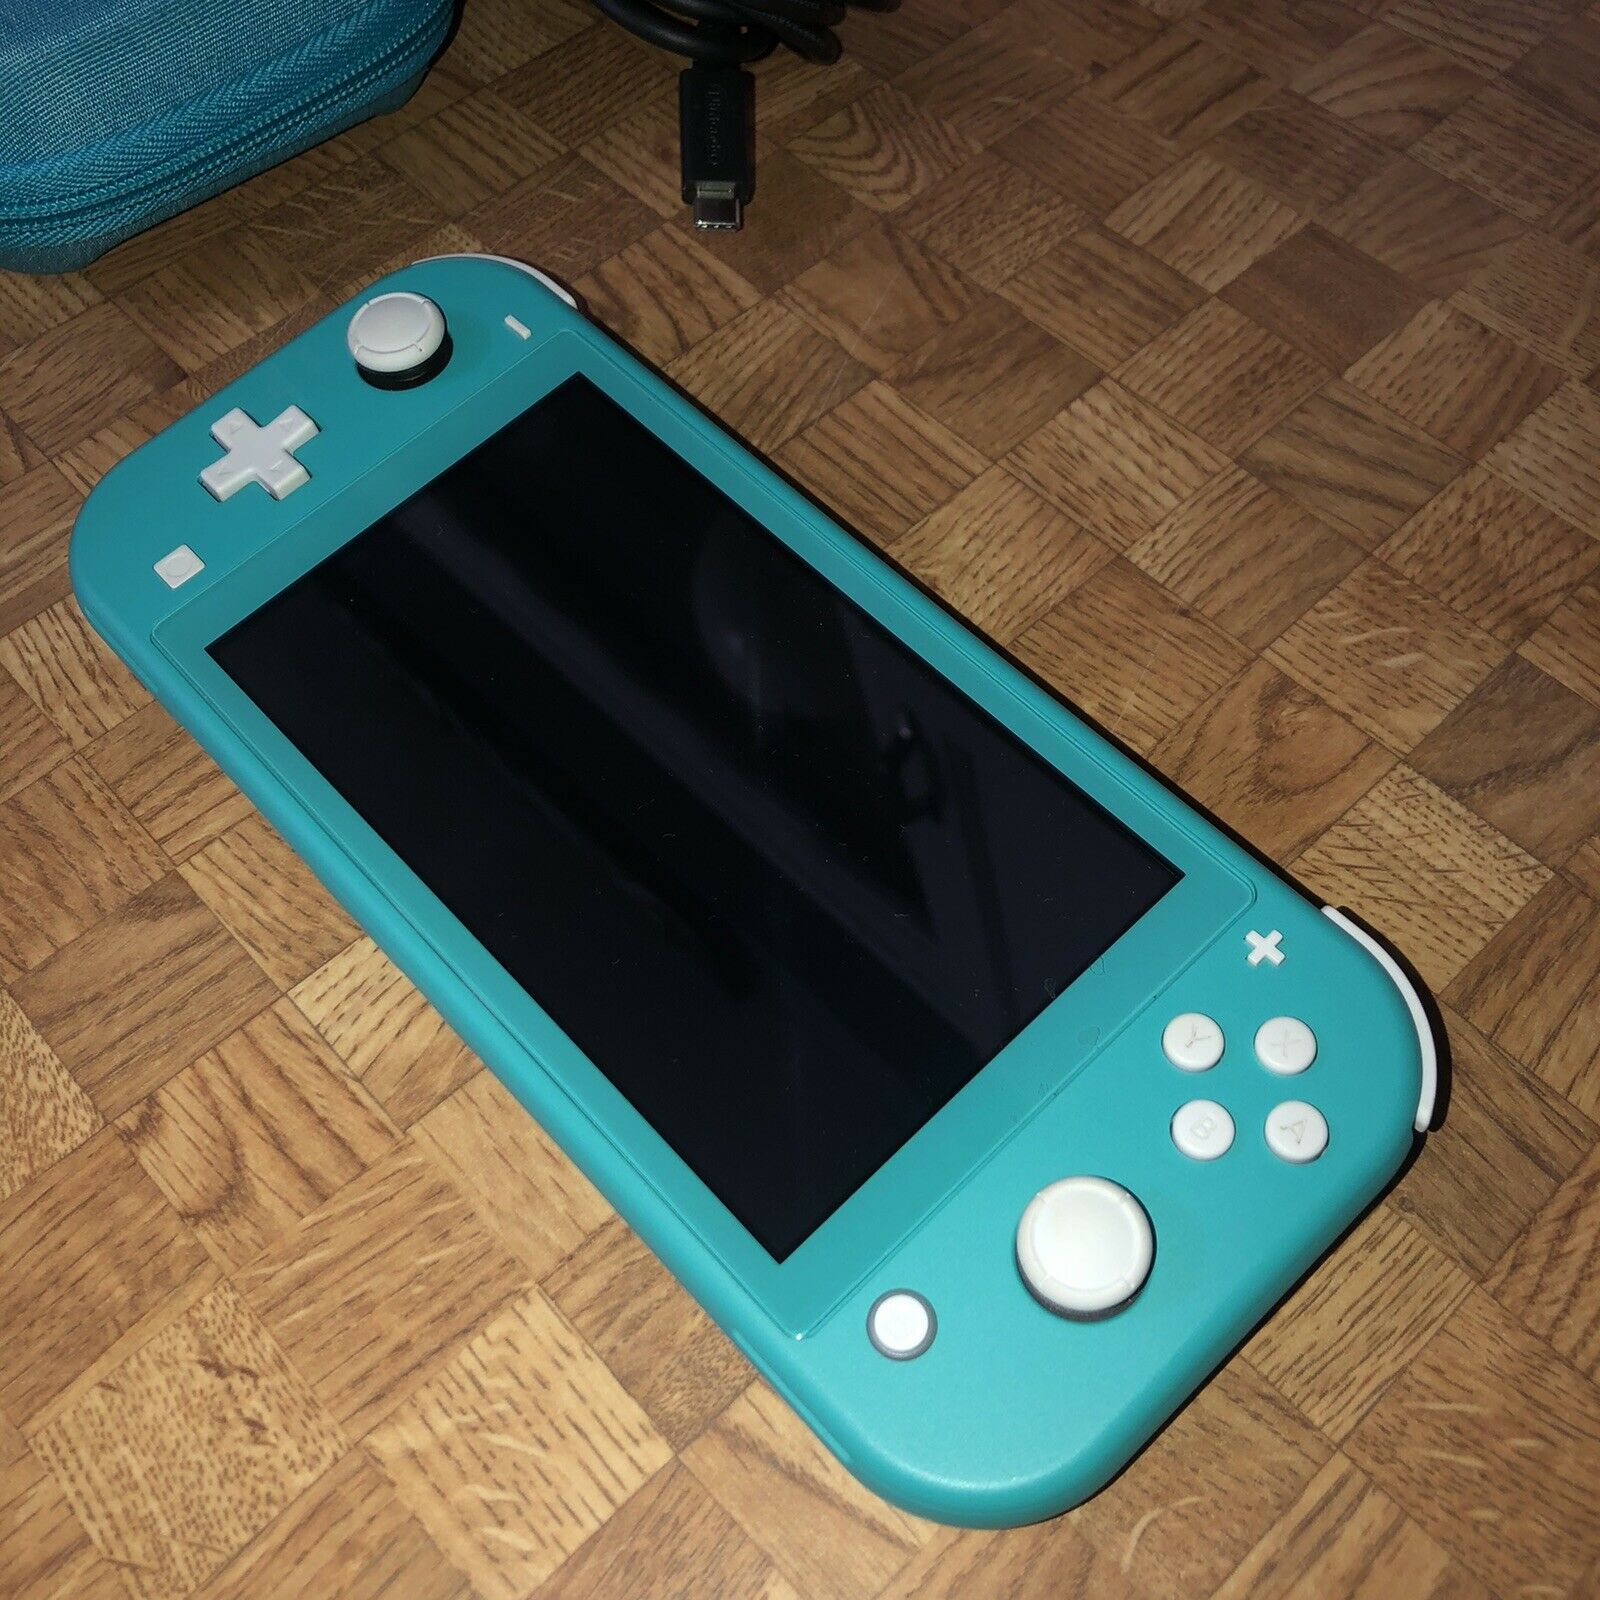 Nintendo SWITCH Lite Turquoise Teal Handheld Video Recreation Console w